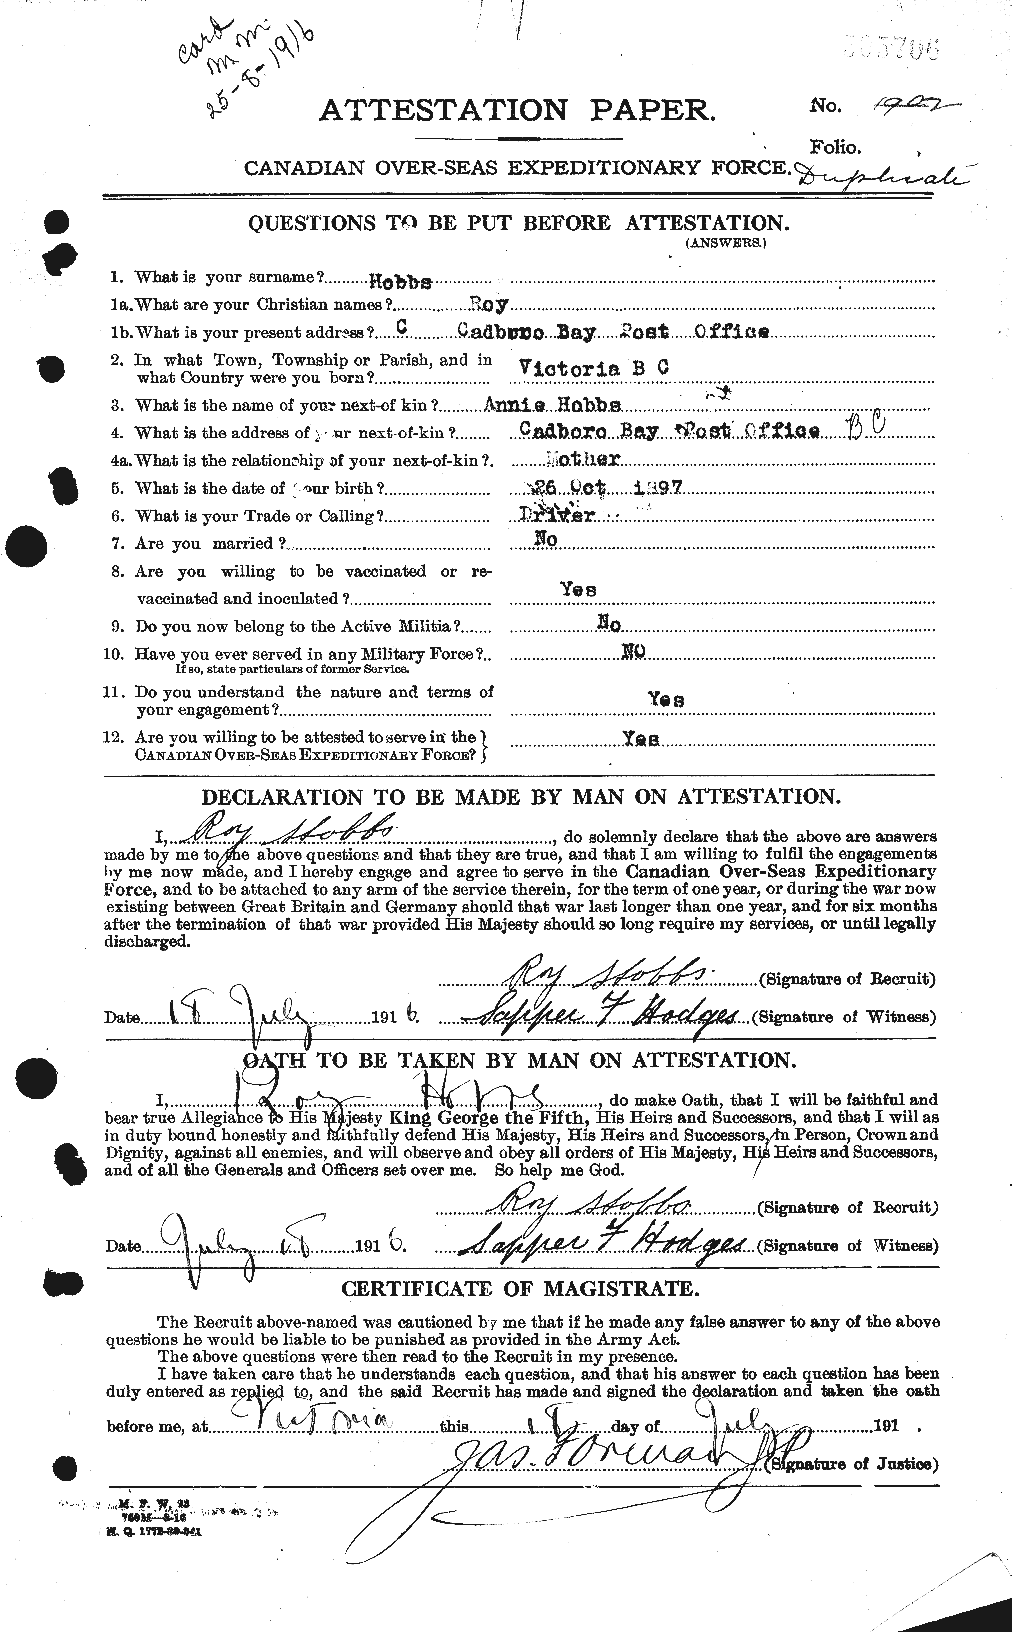 Personnel Records of the First World War - CEF 395000a